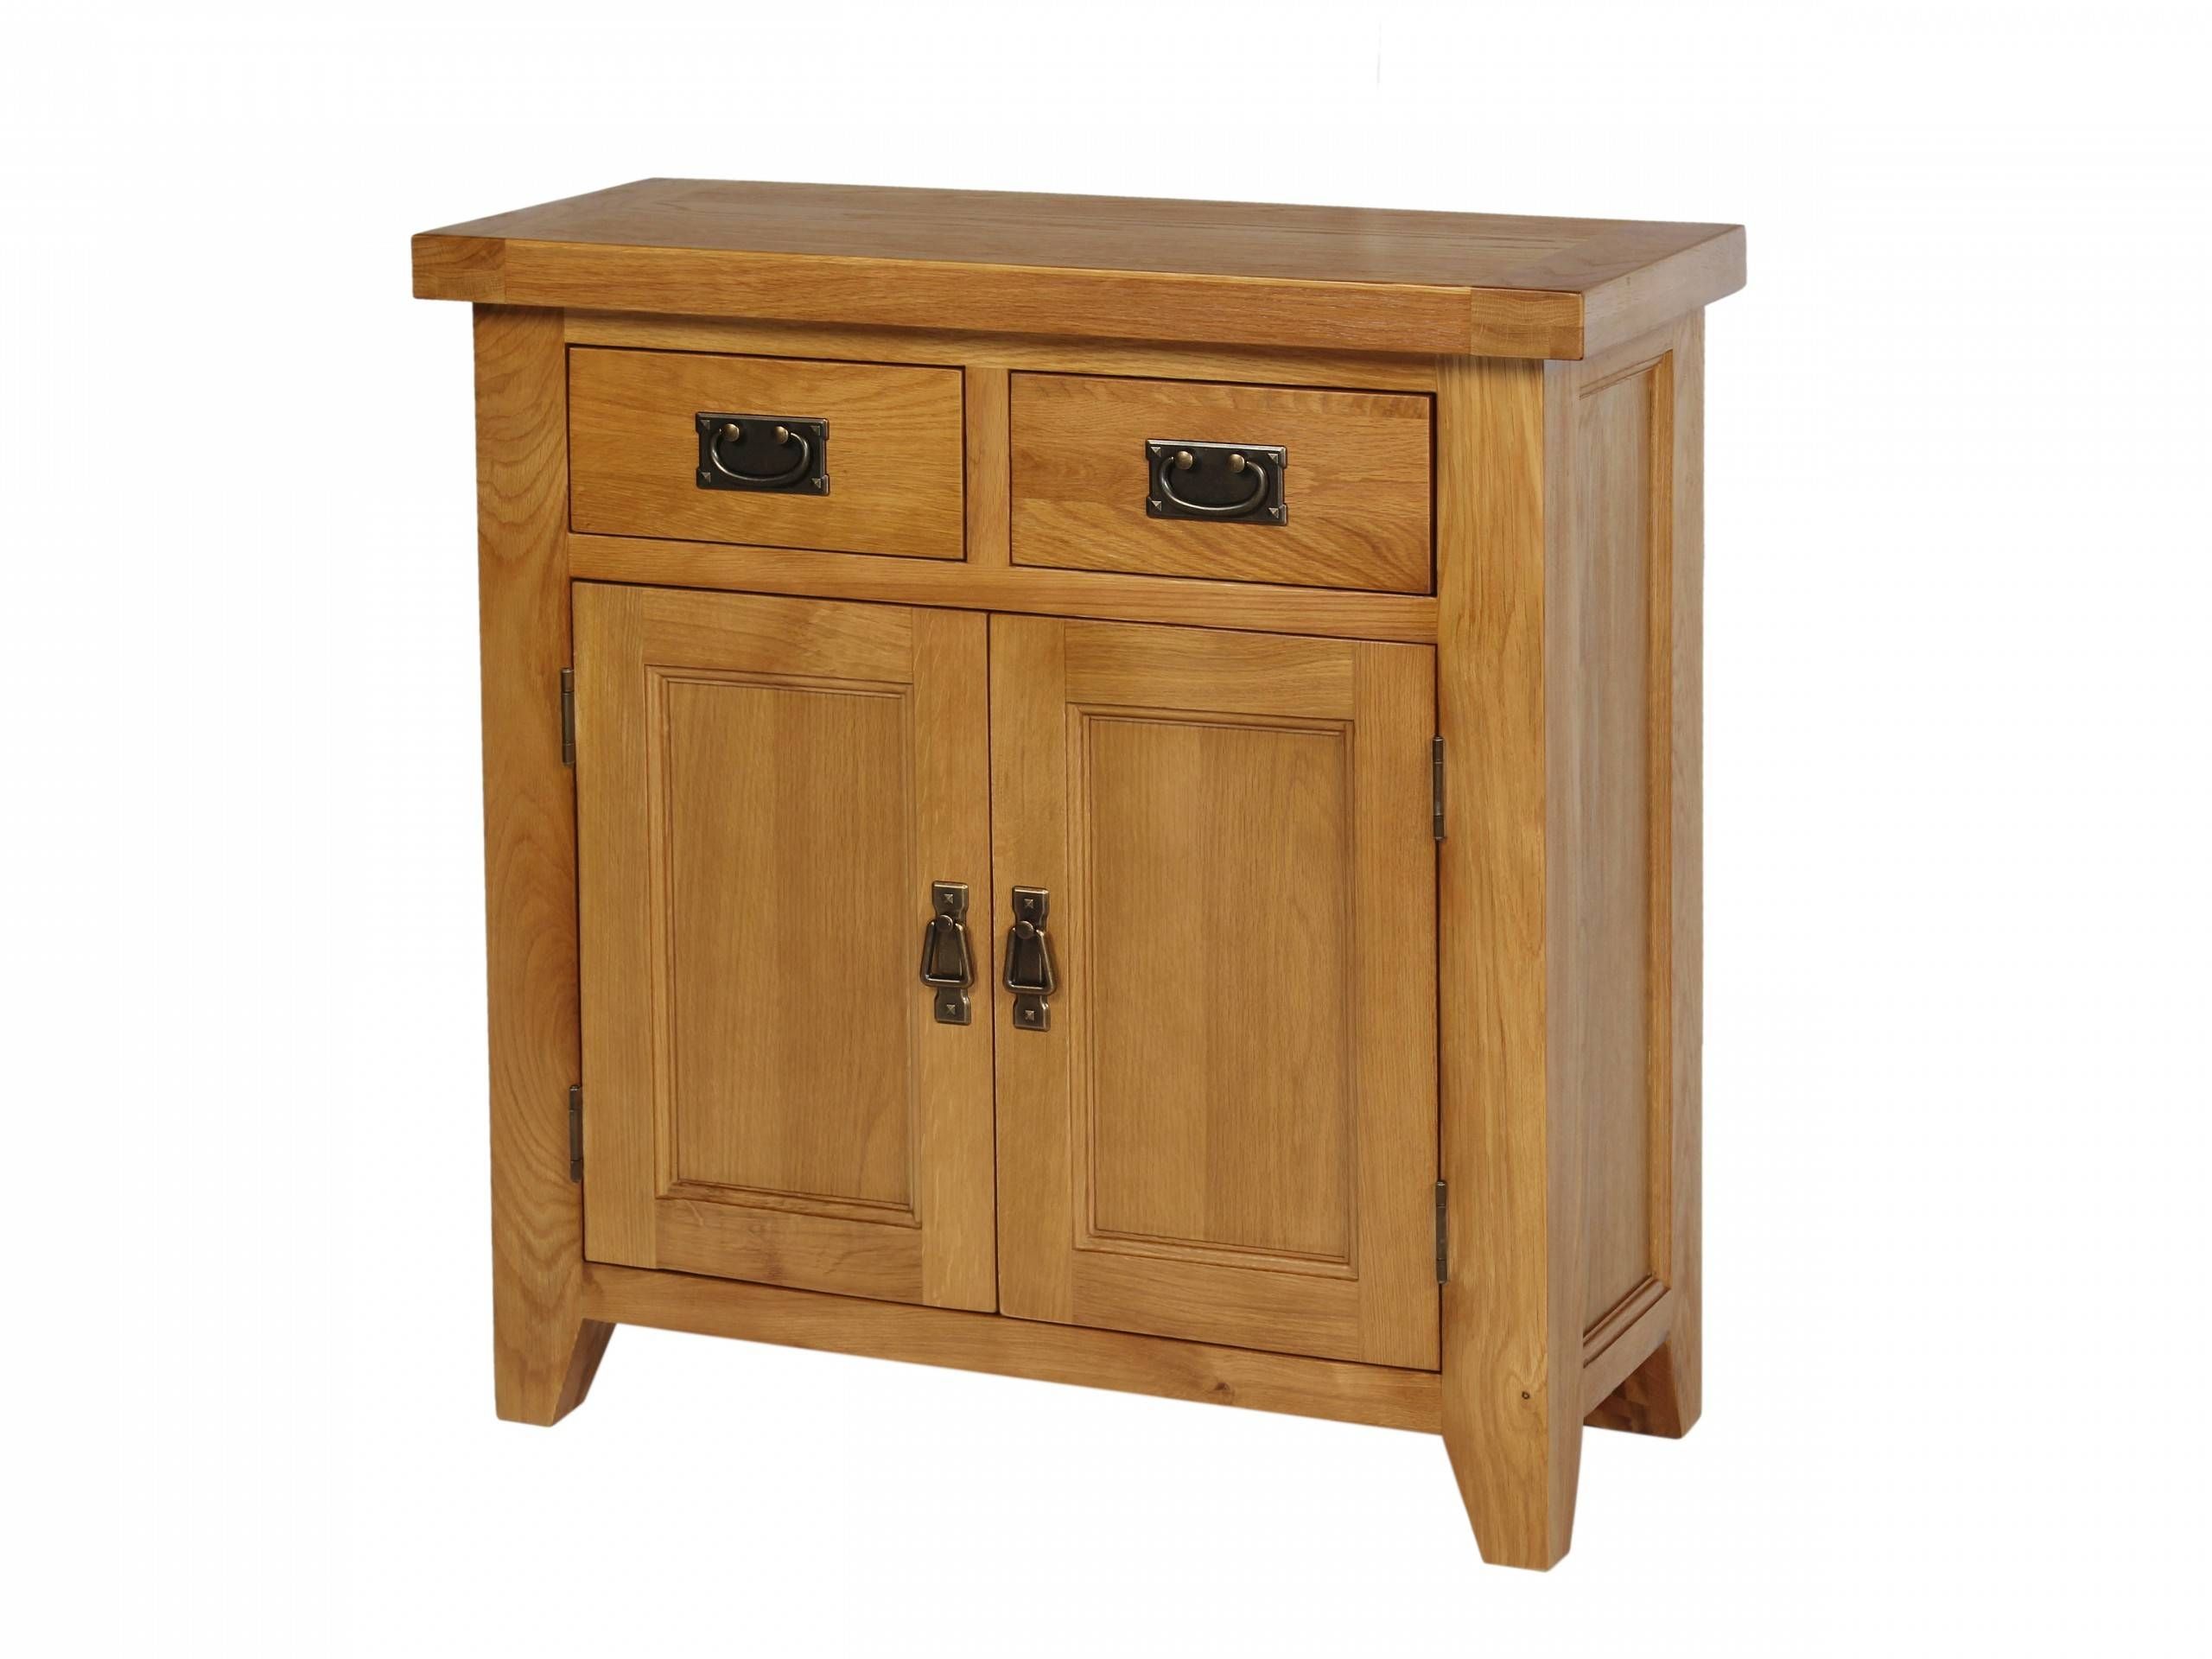 Small 80cm Wide Country Oak Petite Sideboard Throughout Narrow Oak Sideboard (View 11 of 20)